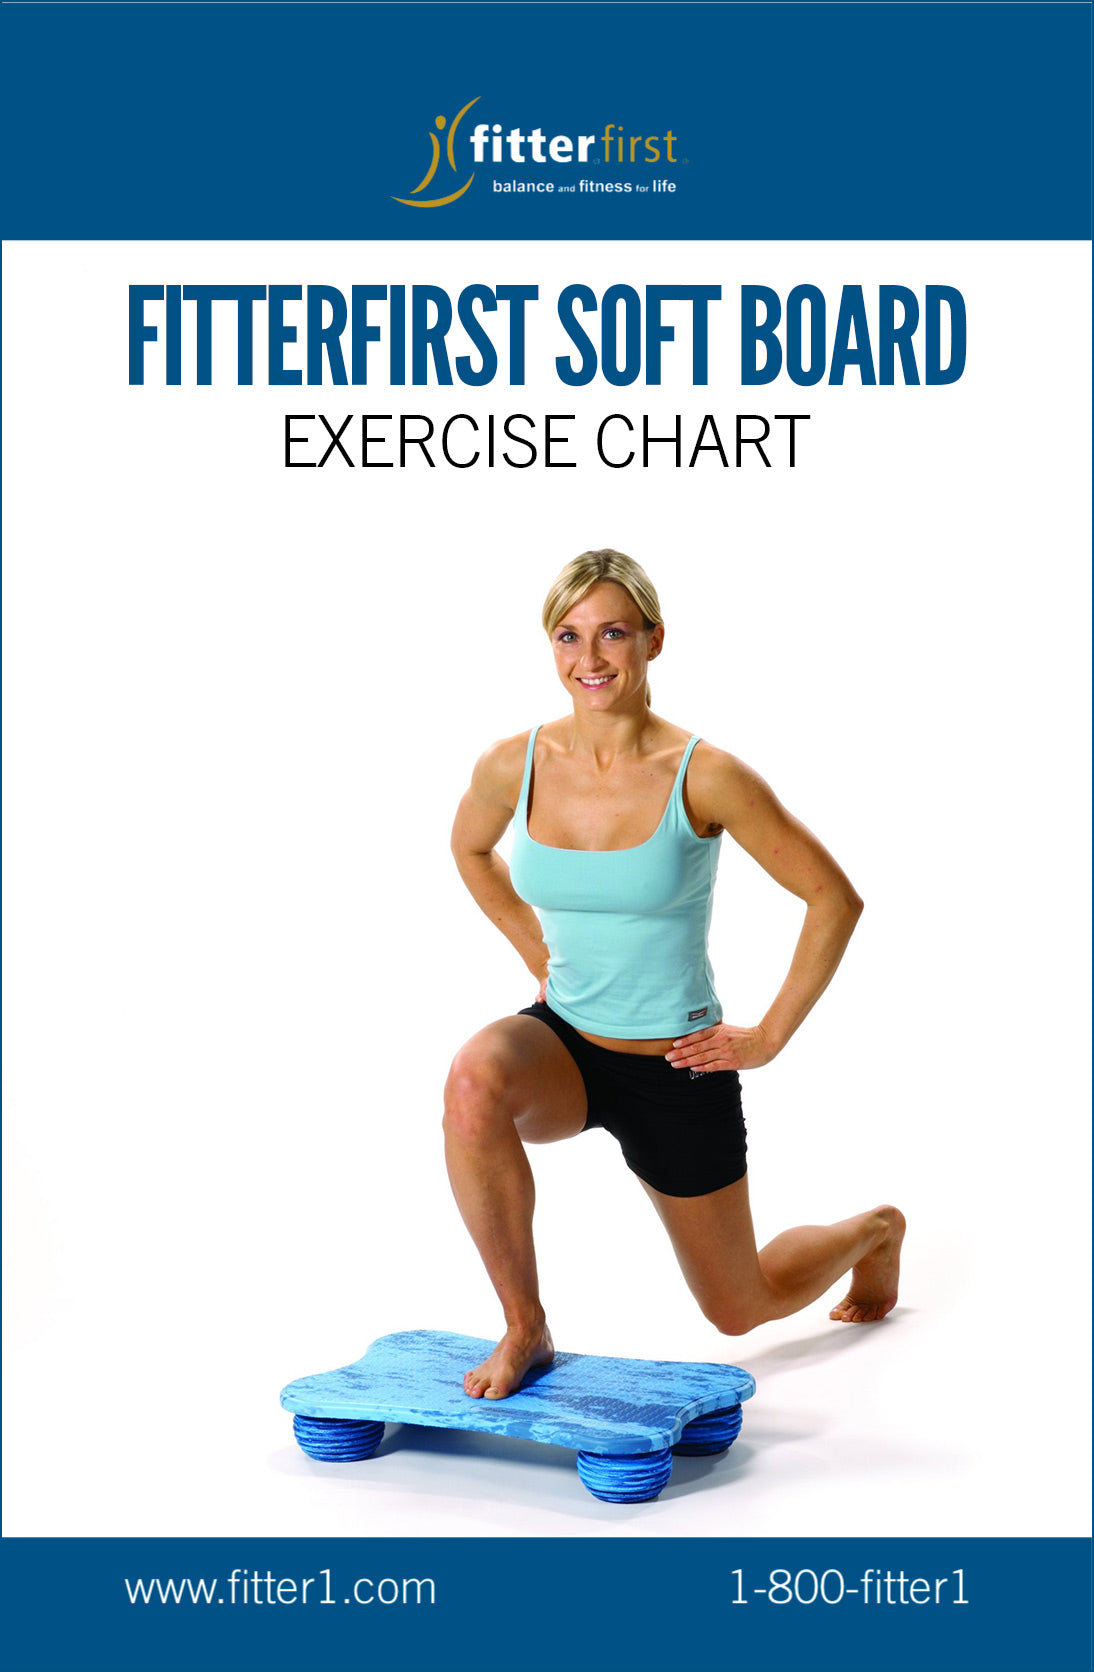 Fitterfirst Softboard Exercise Chart